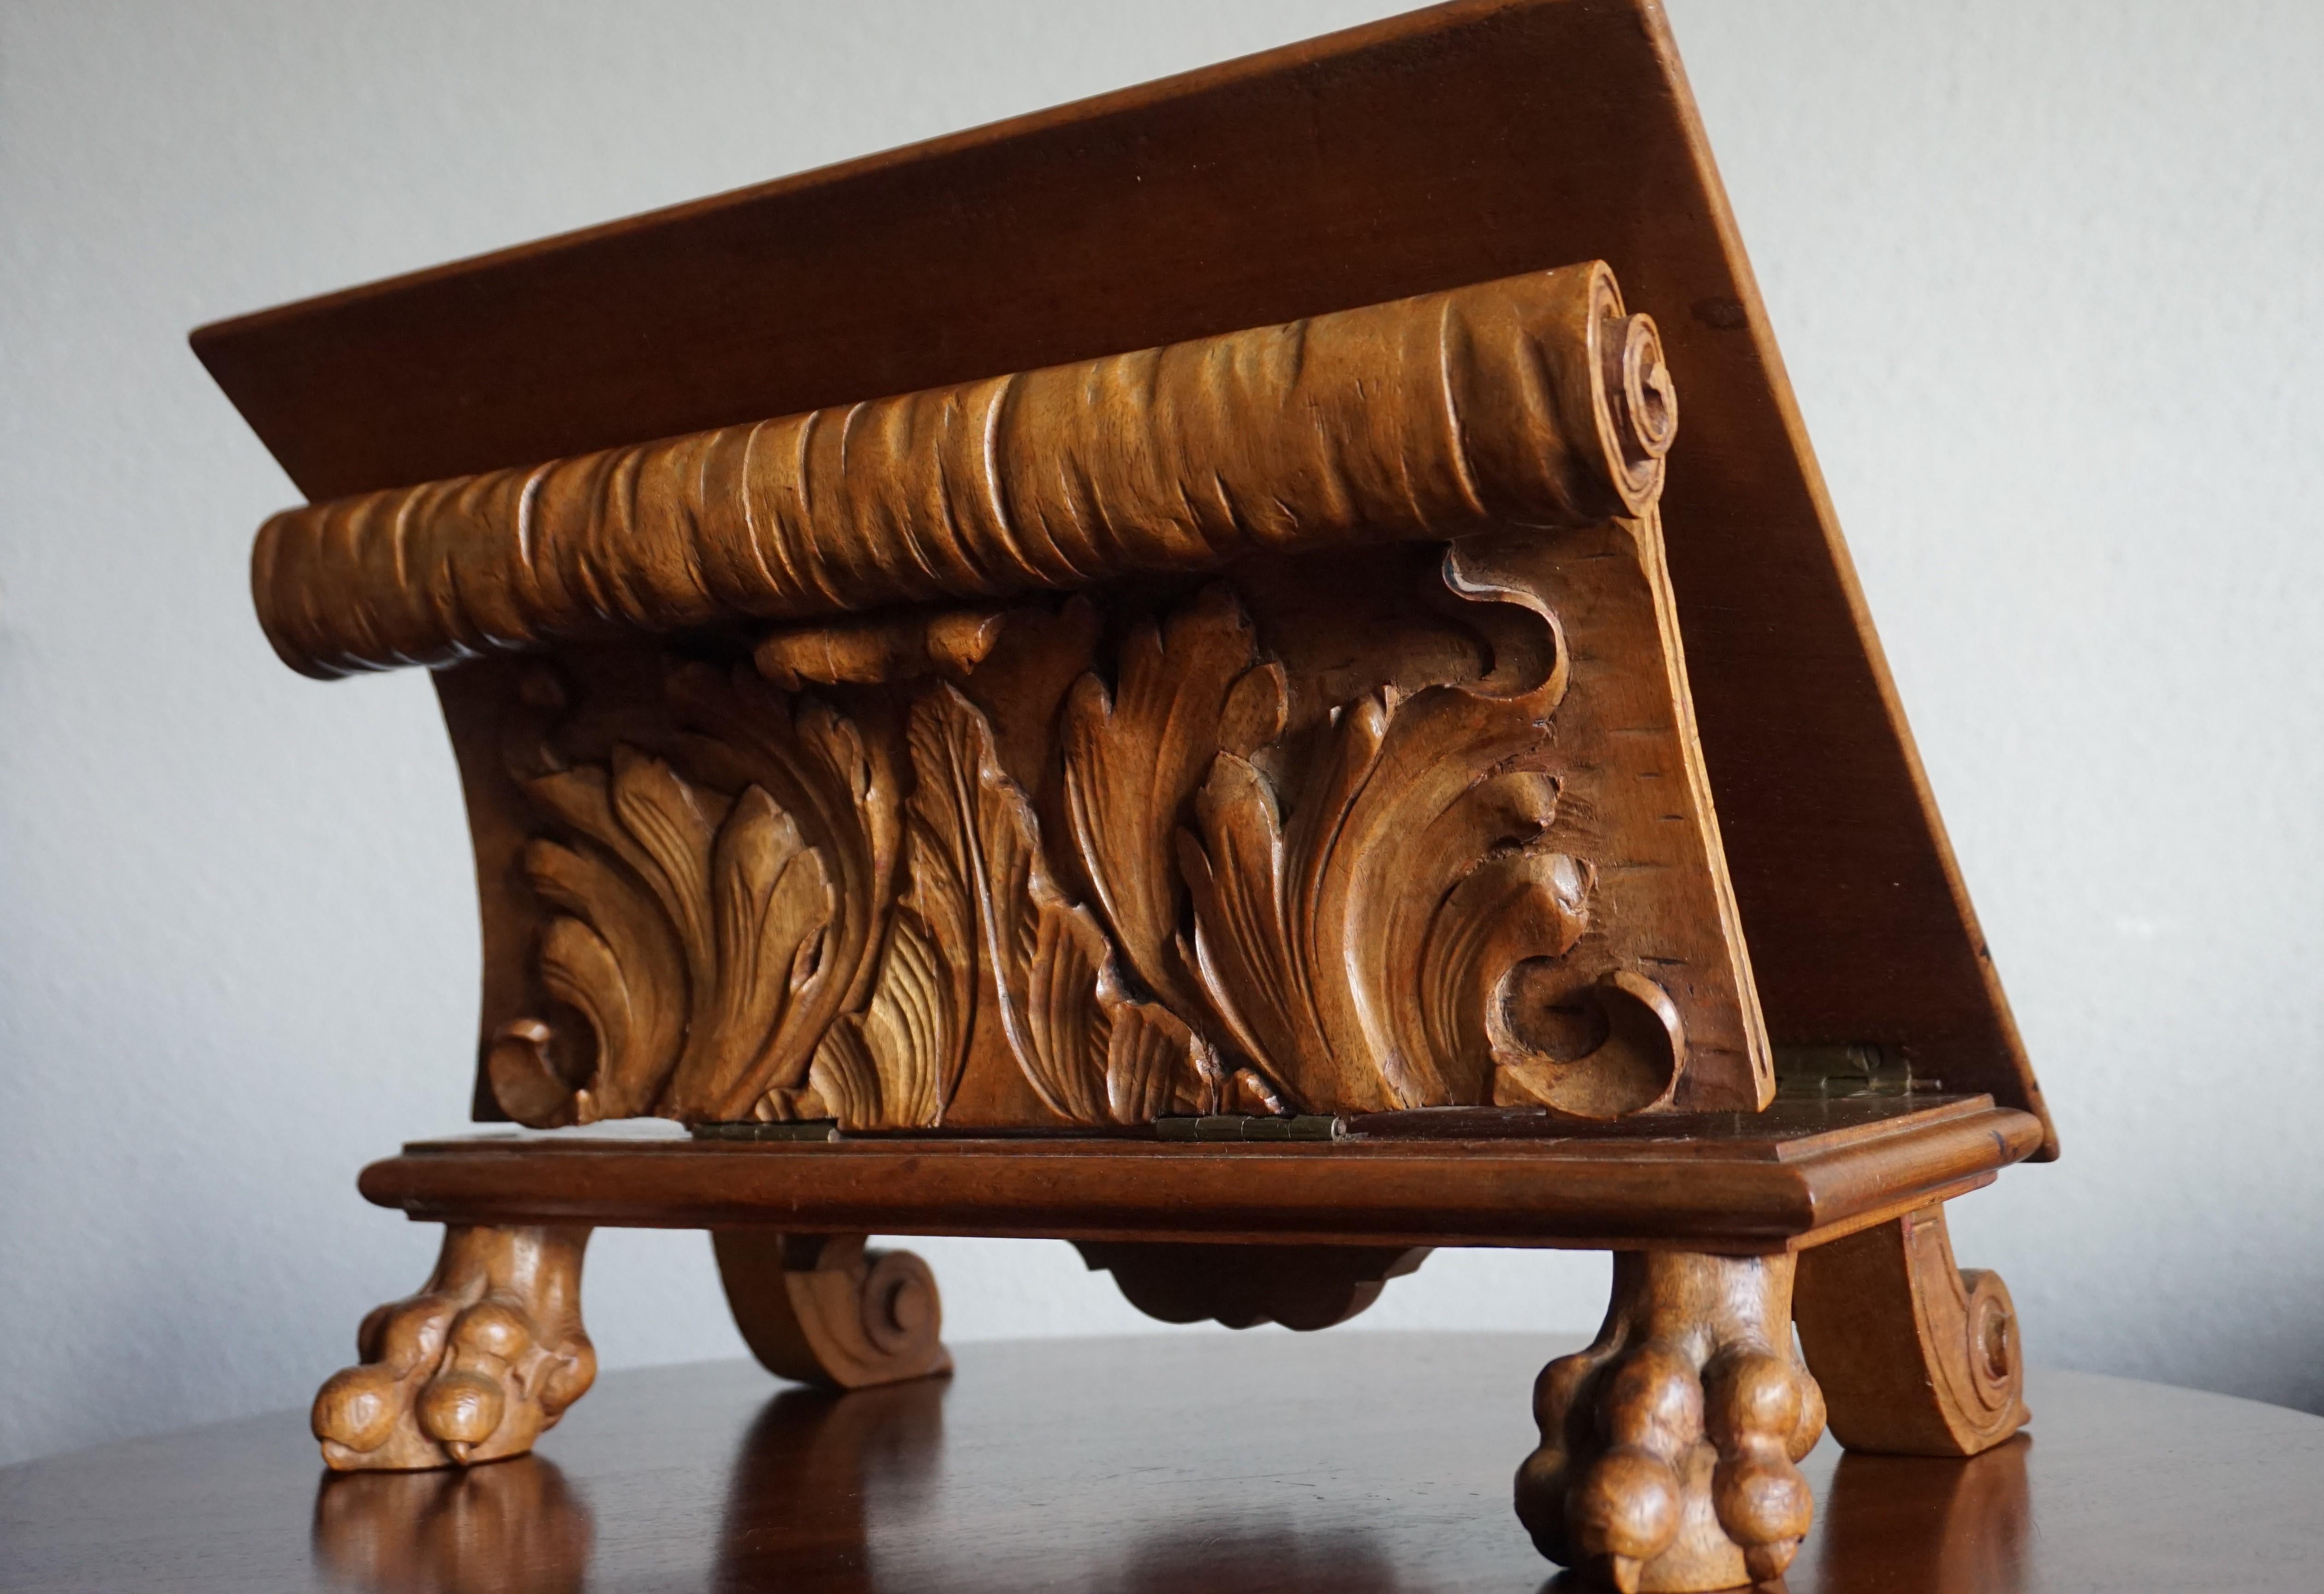 Hand-Crafted Antique & Unique Adjustable Bookstand with Hand Carved Leaf Pattern & Claw Feet